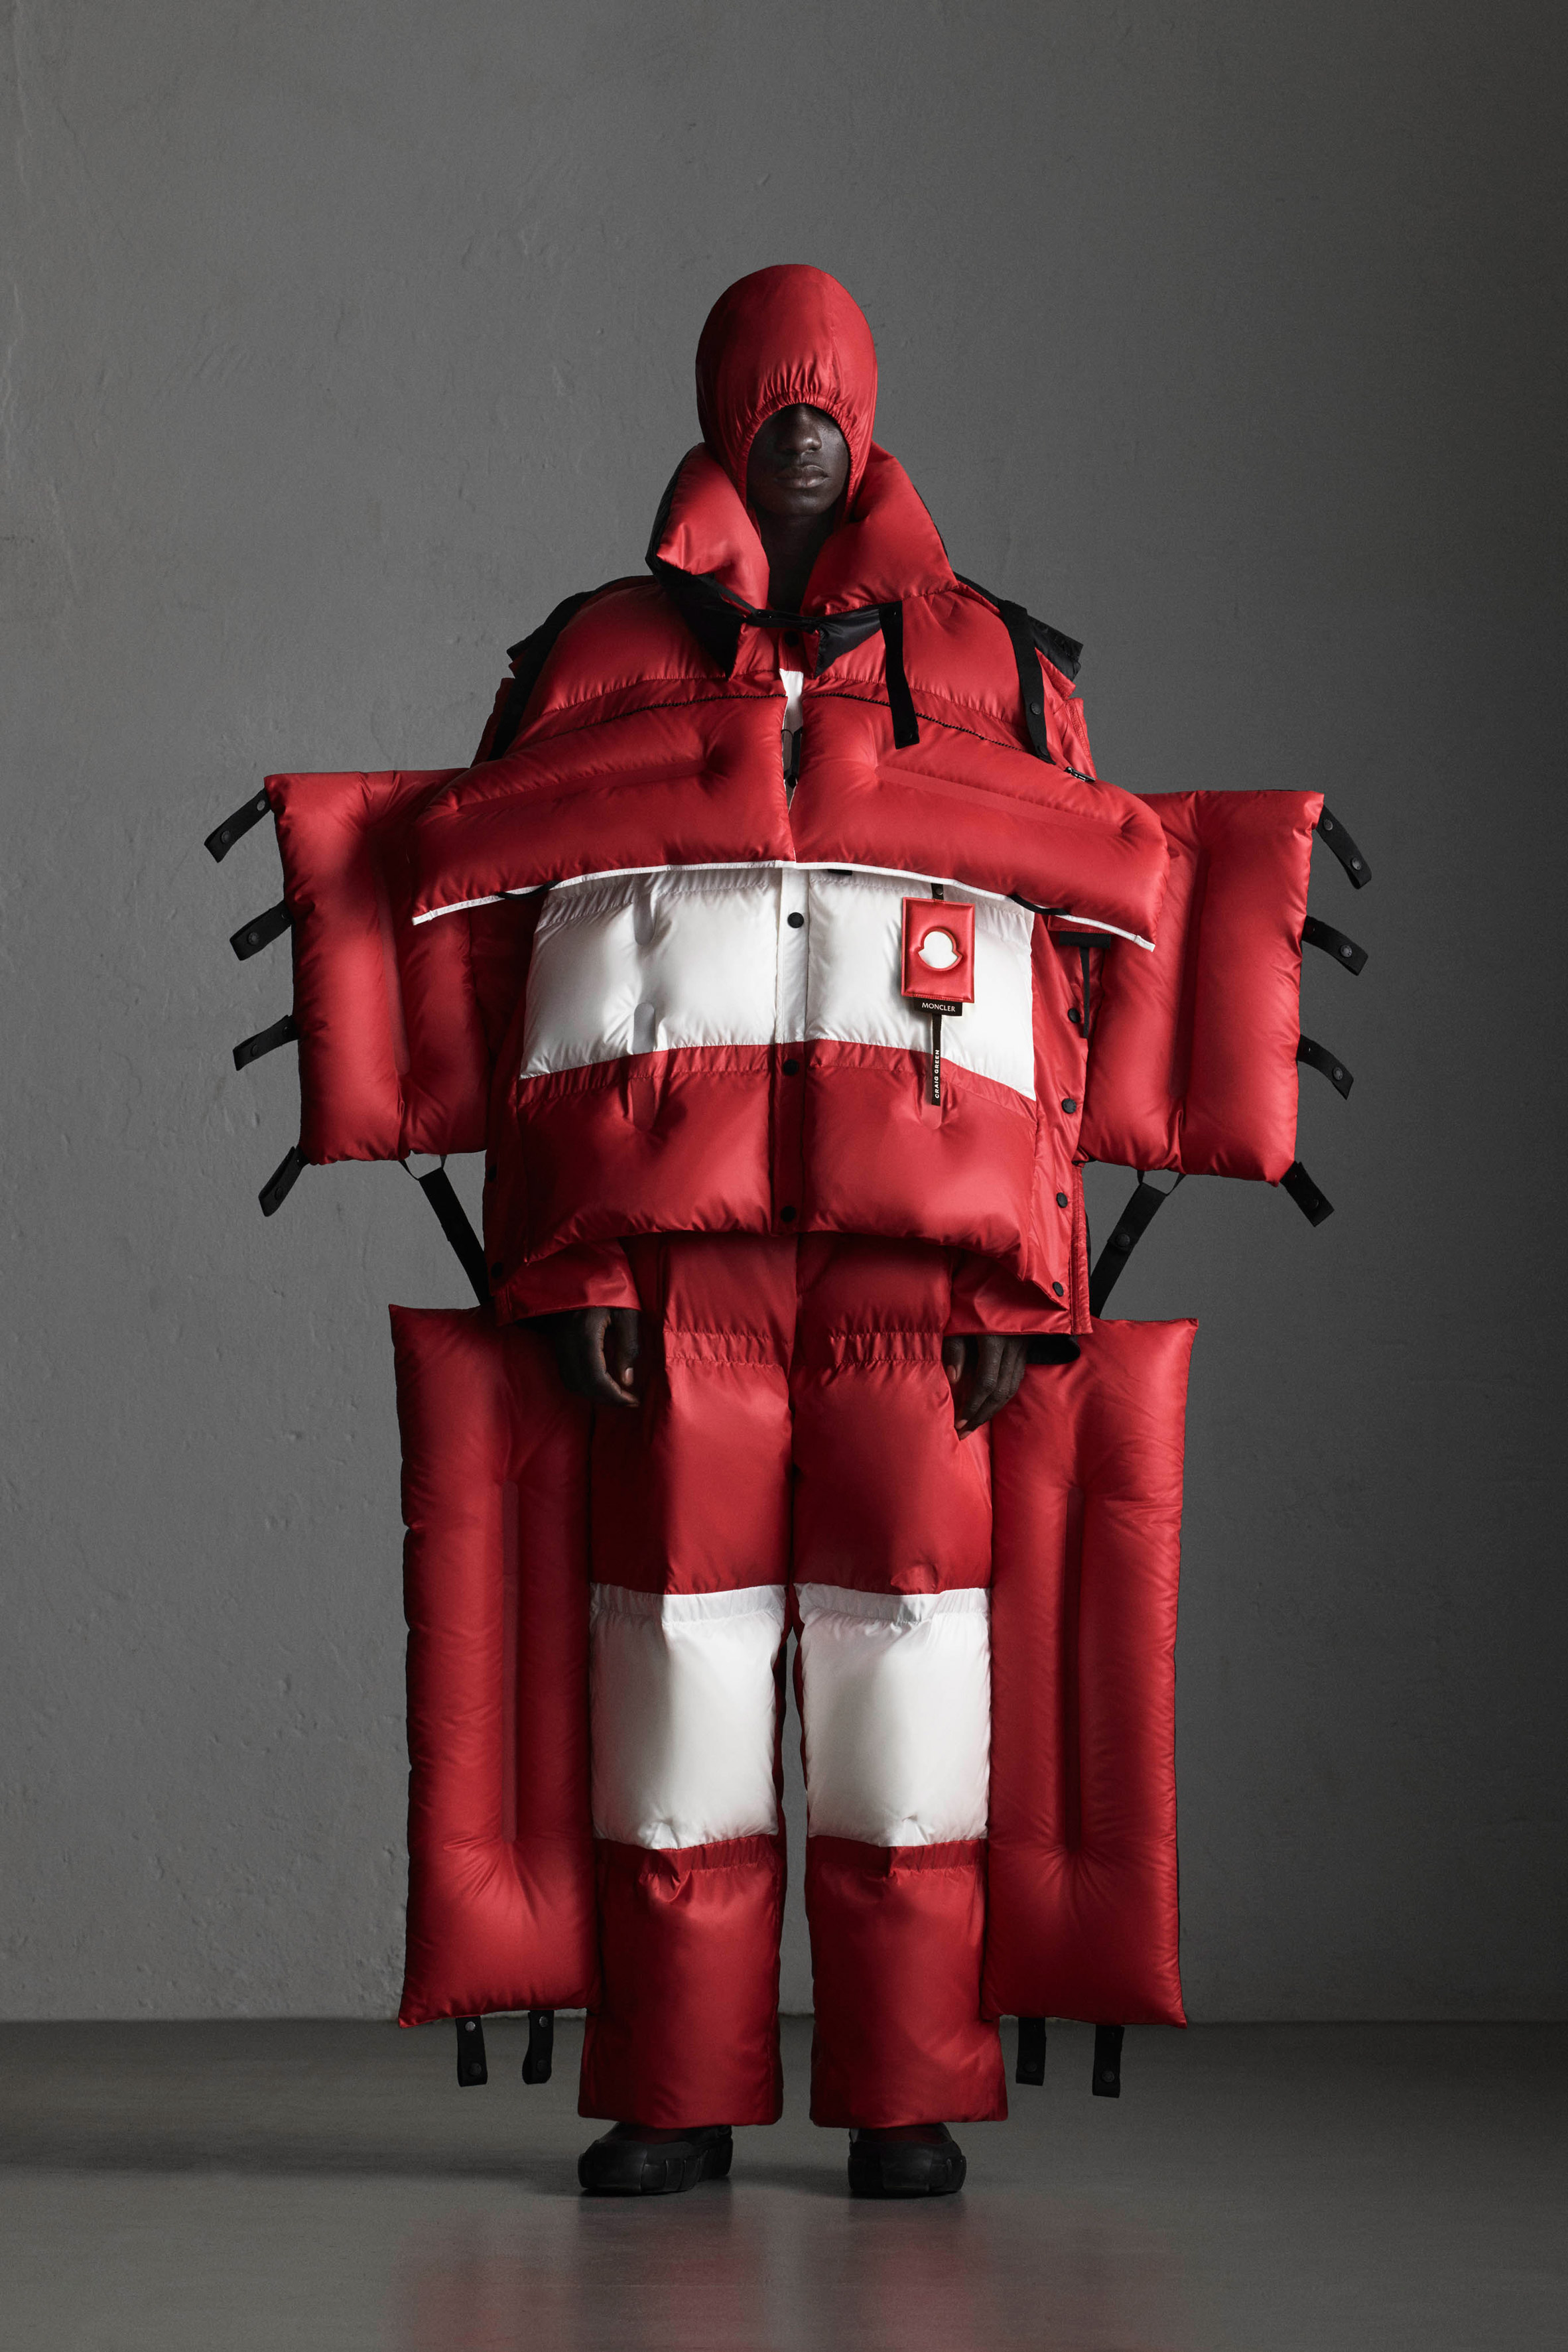 Craig Green's Moncler Genius puffer suit can be rolled up like